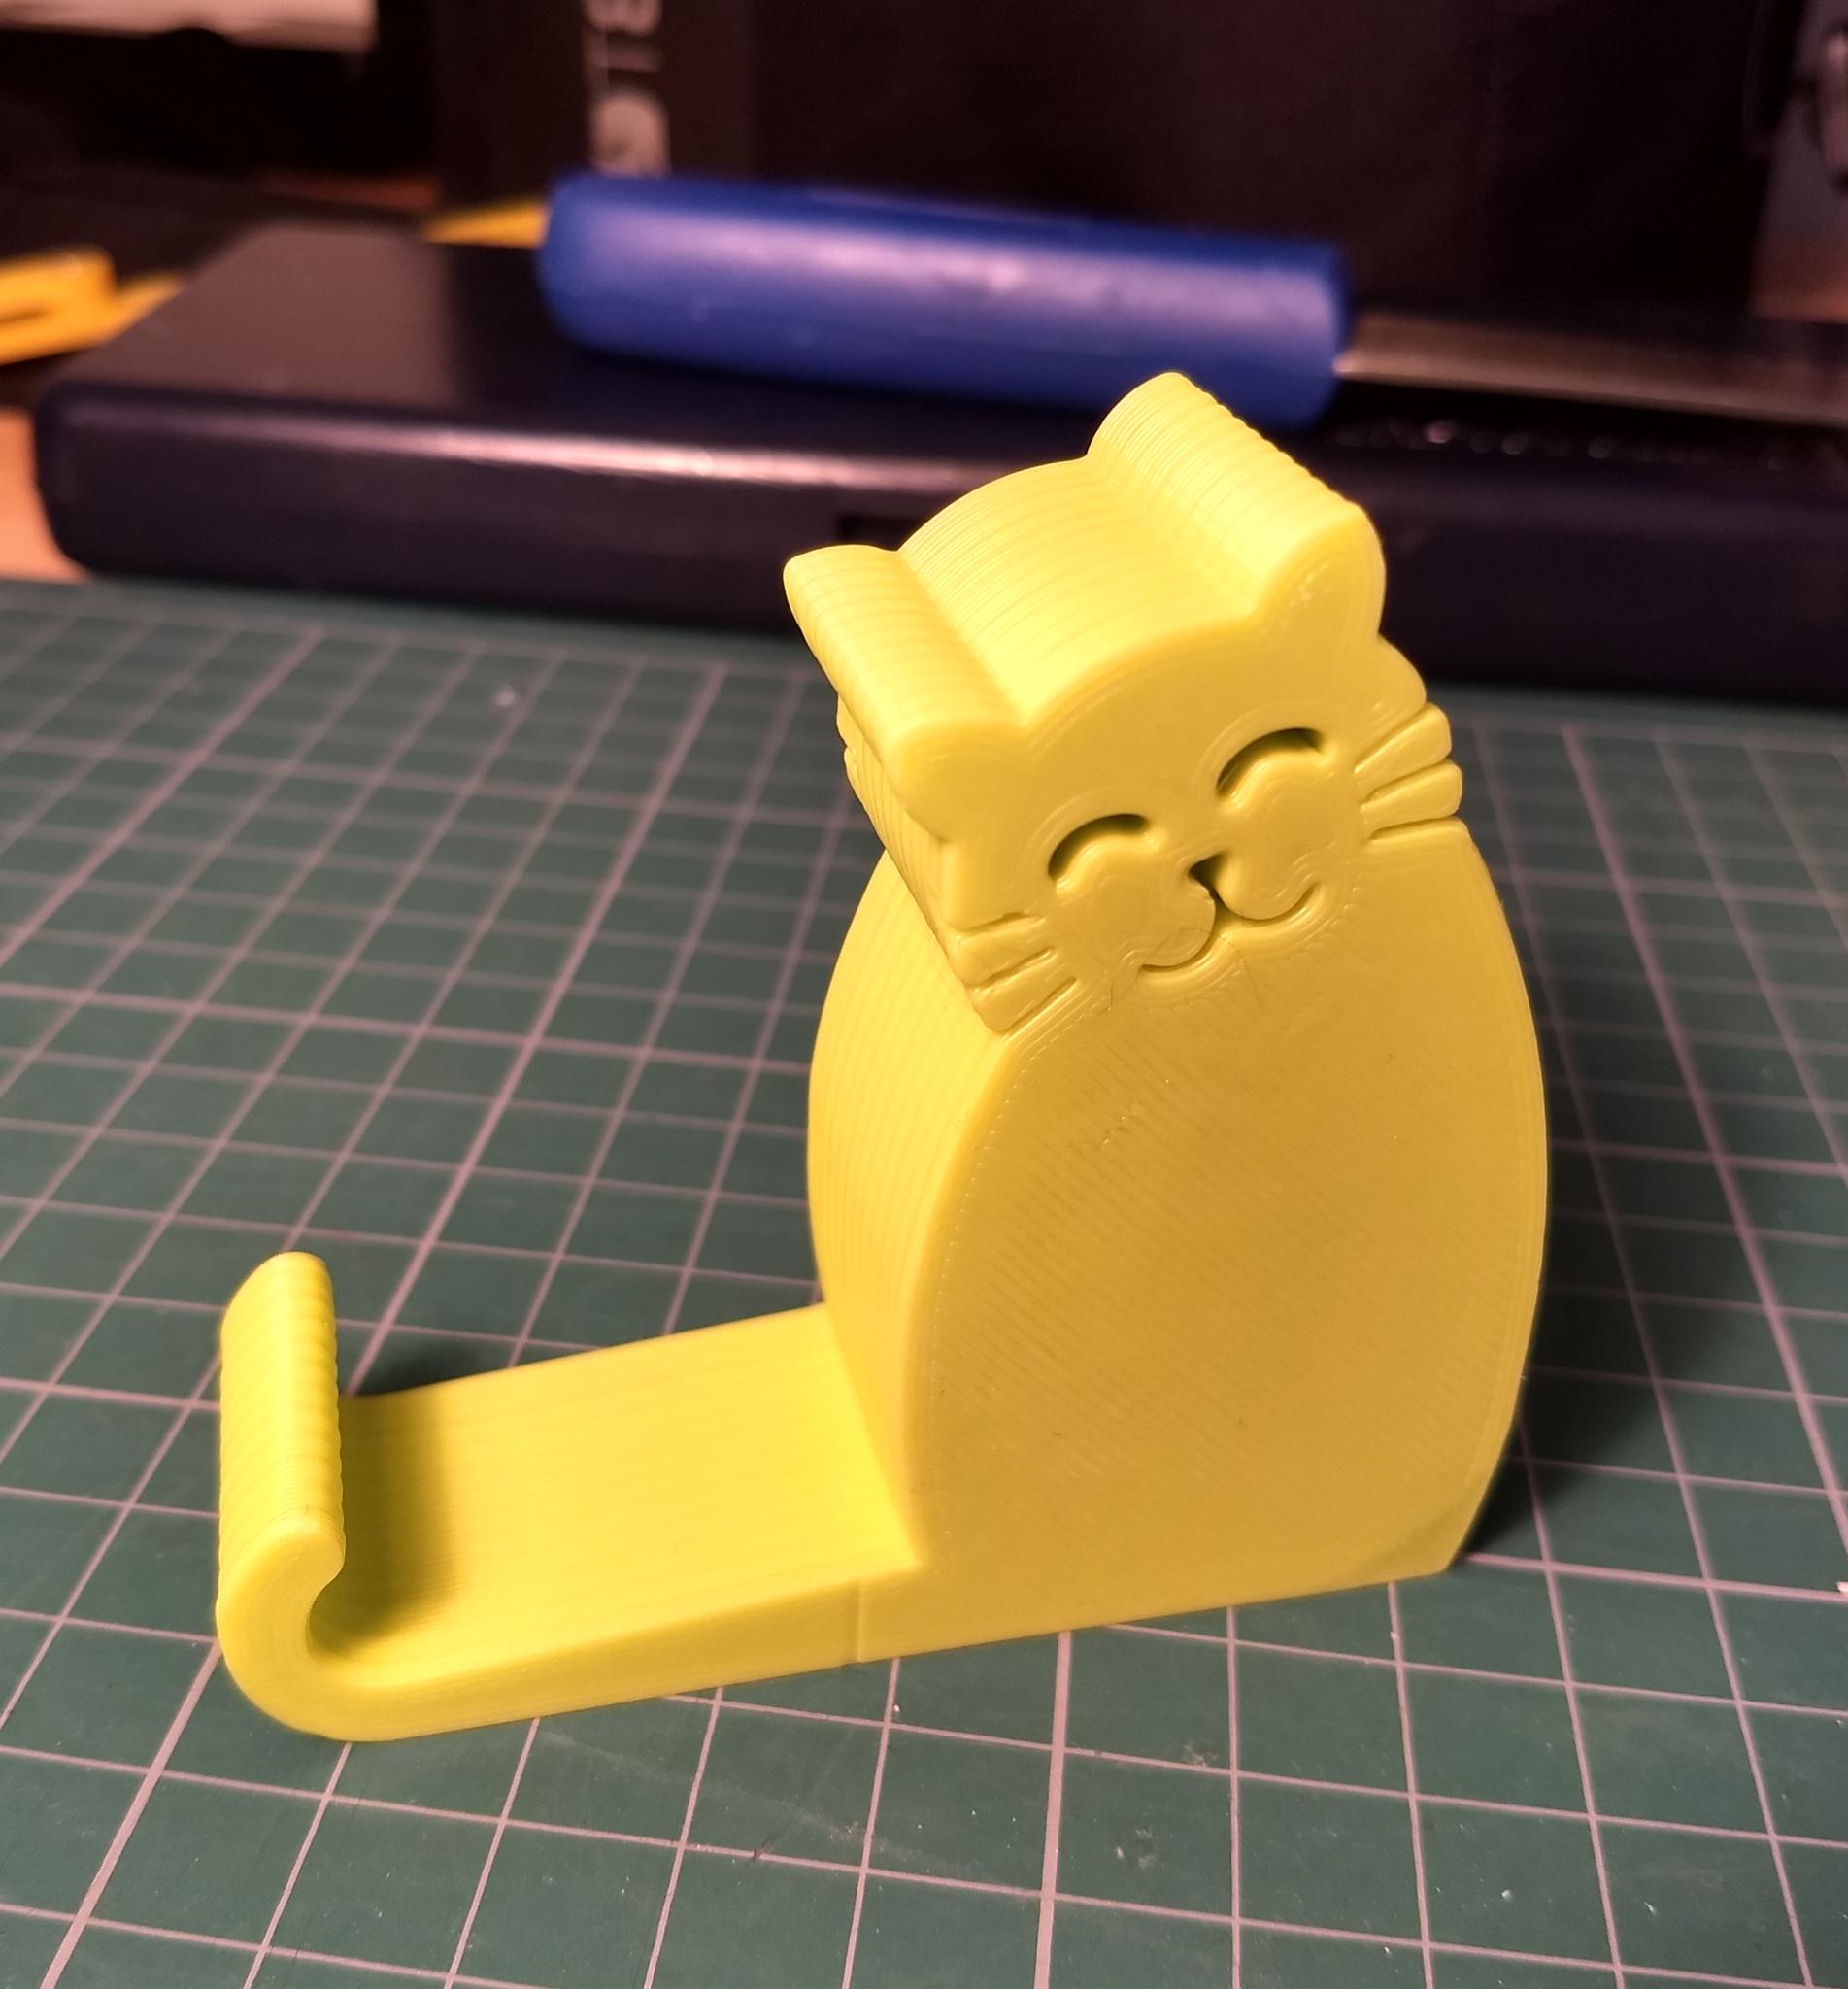 A stand for a smartphone in the stylized shape of a cat, with the cat tail curling up to retain the bottom of the phone. The part is 3D printed in light green colour.